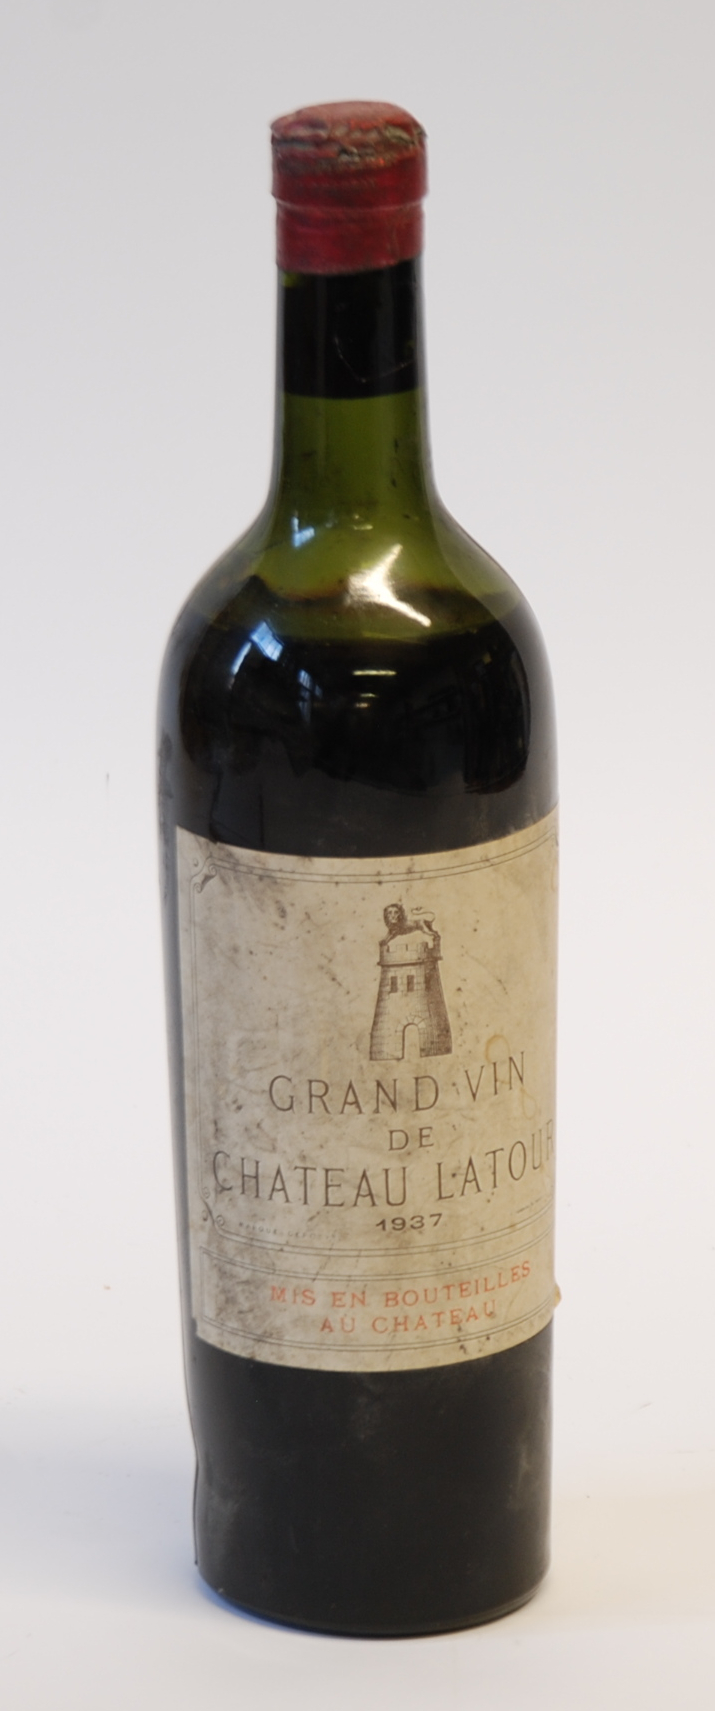 BOTTLE OF GRAND VIN DE CHATEAU LATOUR, 1937, seal cracked and level dropped